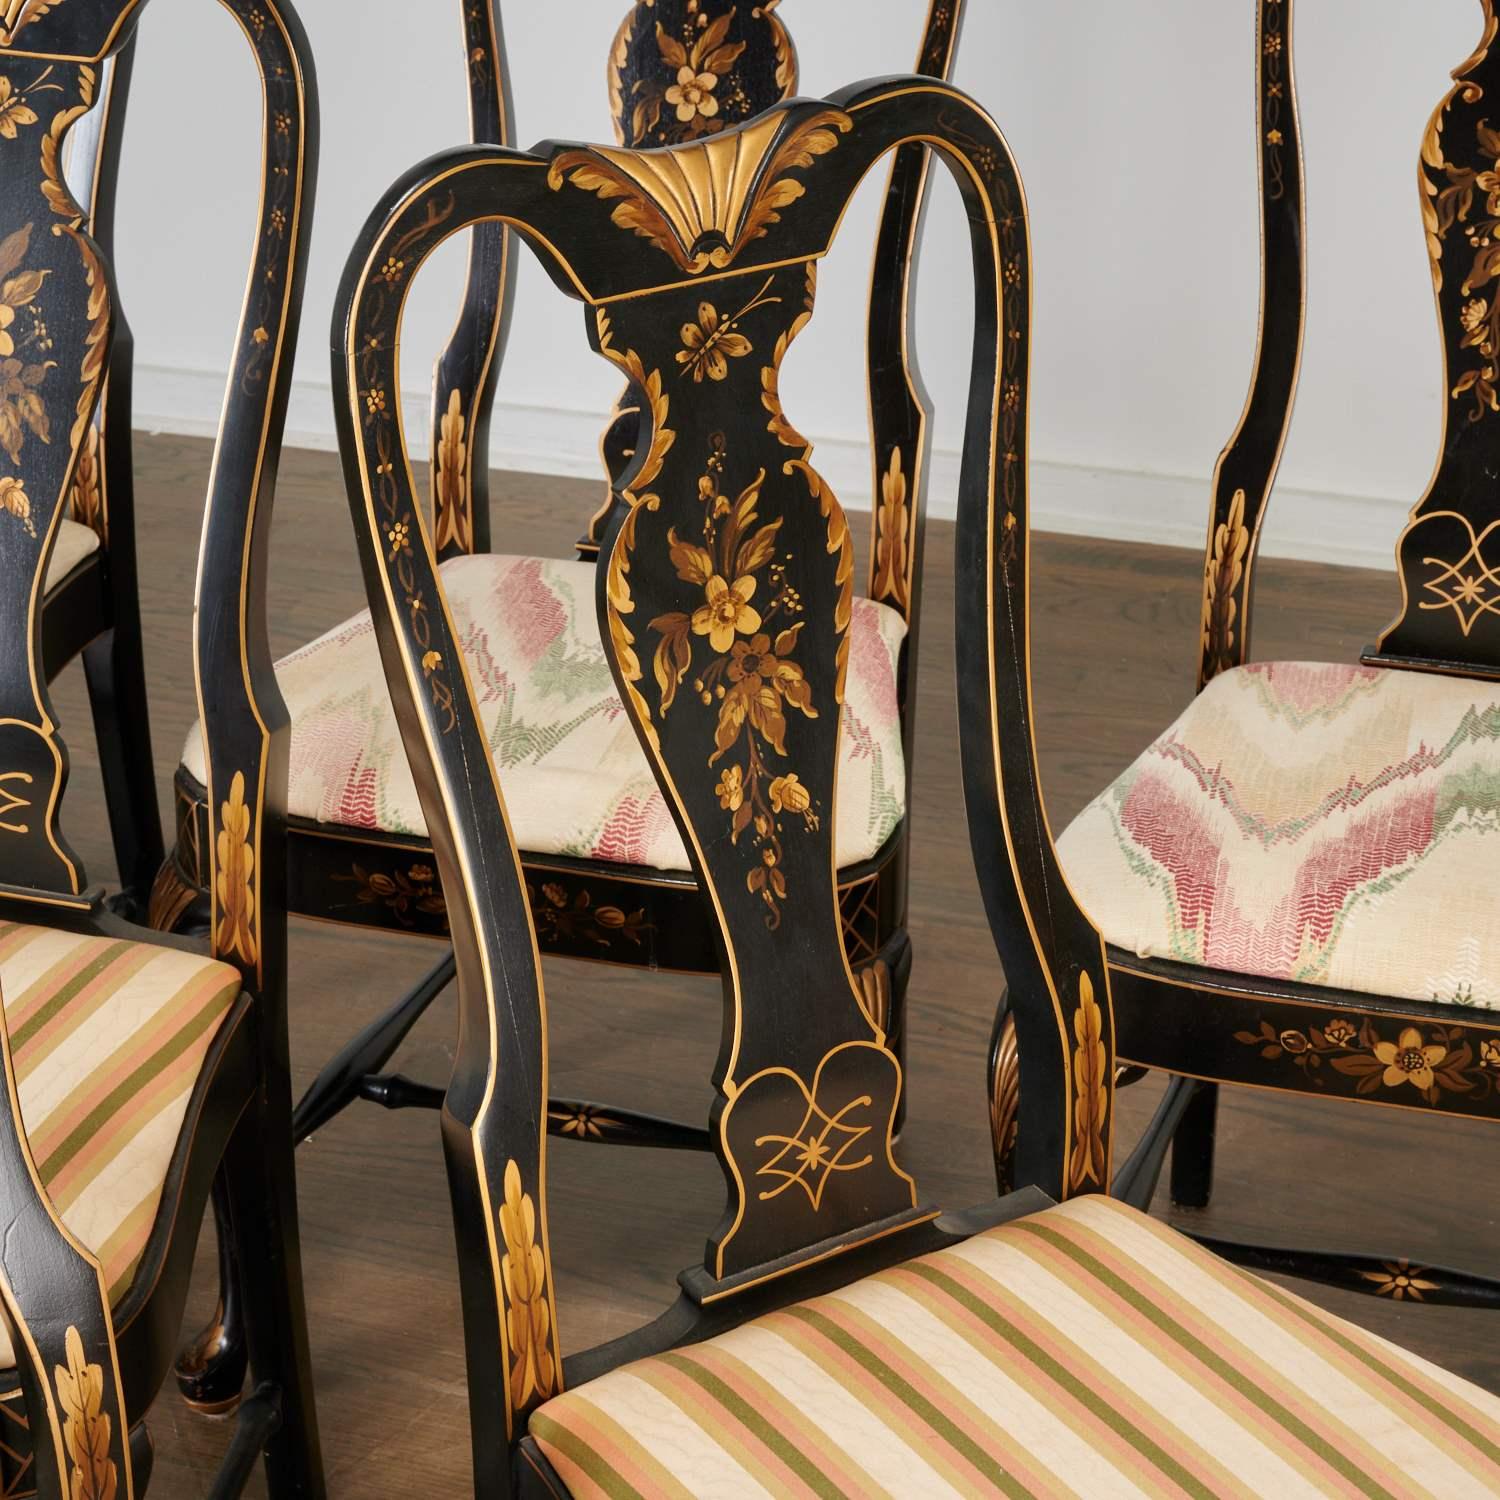 20th c., high quality black lacquer and hand painted gilt dining chairs. Six (6) Georgian style side chairs with urn shaped splat, on cabriole legs joined by turned stretcher, with mixed (2 striped silk and 4 ikat cotton/linen fabric) upholstered